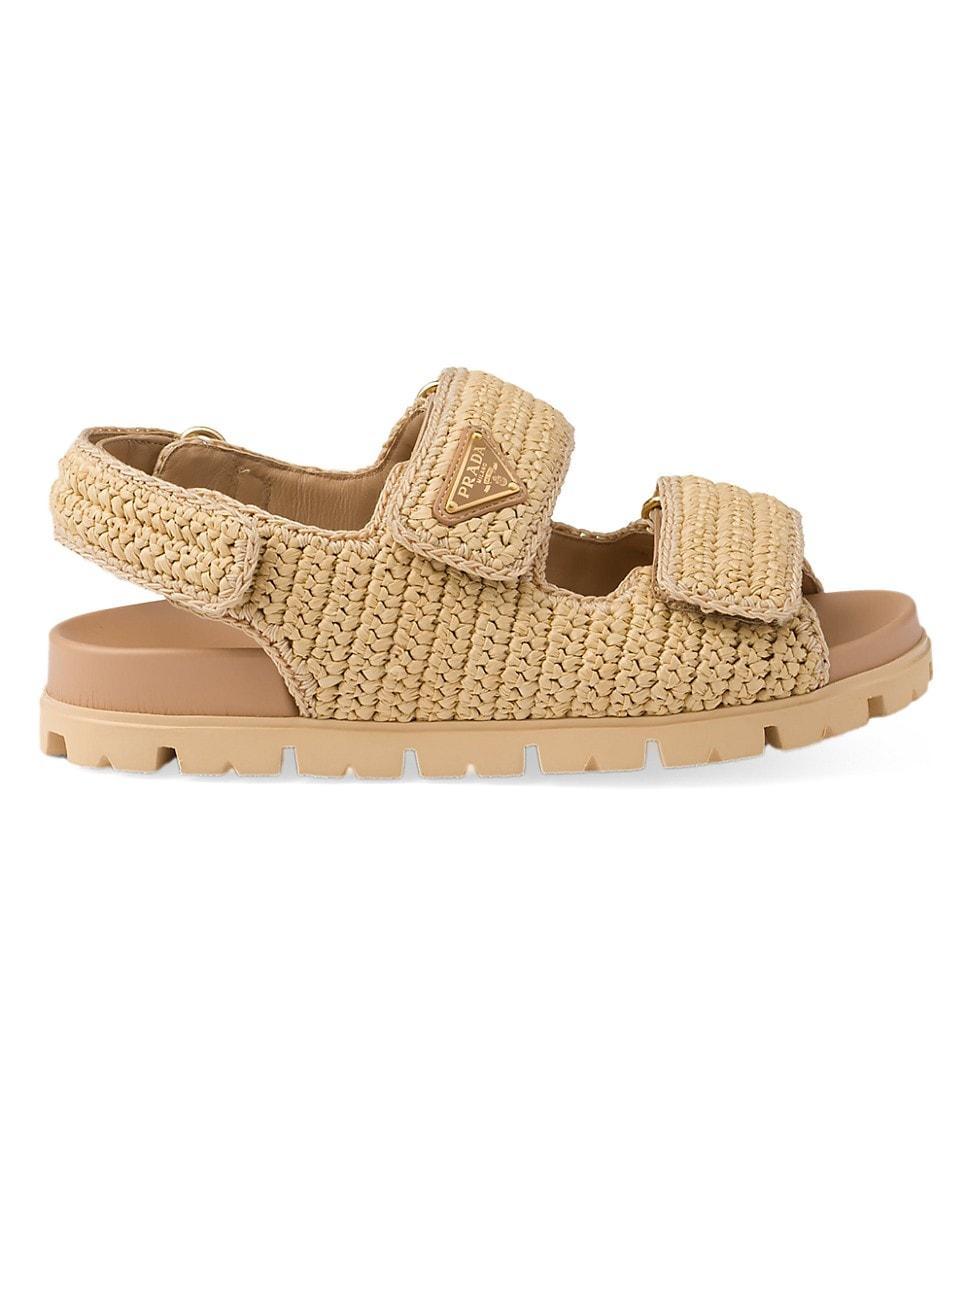 Womens Woven Fabric Sandals Product Image